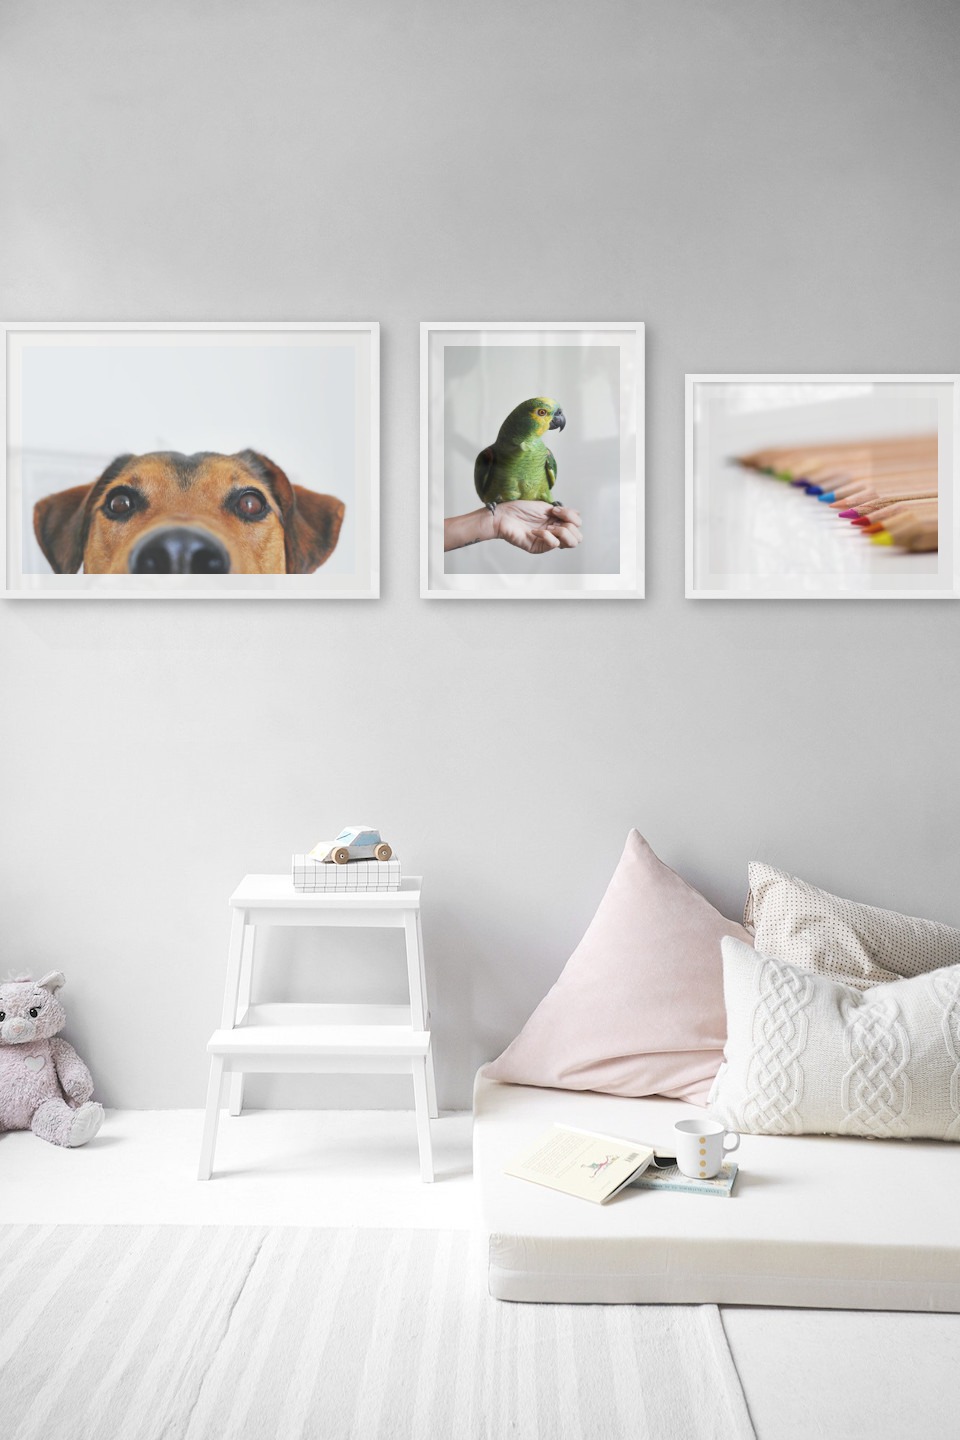 Gallery wall with picture frames in white in sizes 50x70 and 40x50 with prints "Hundnos", "Green parrot" and "Pencils in different colors"